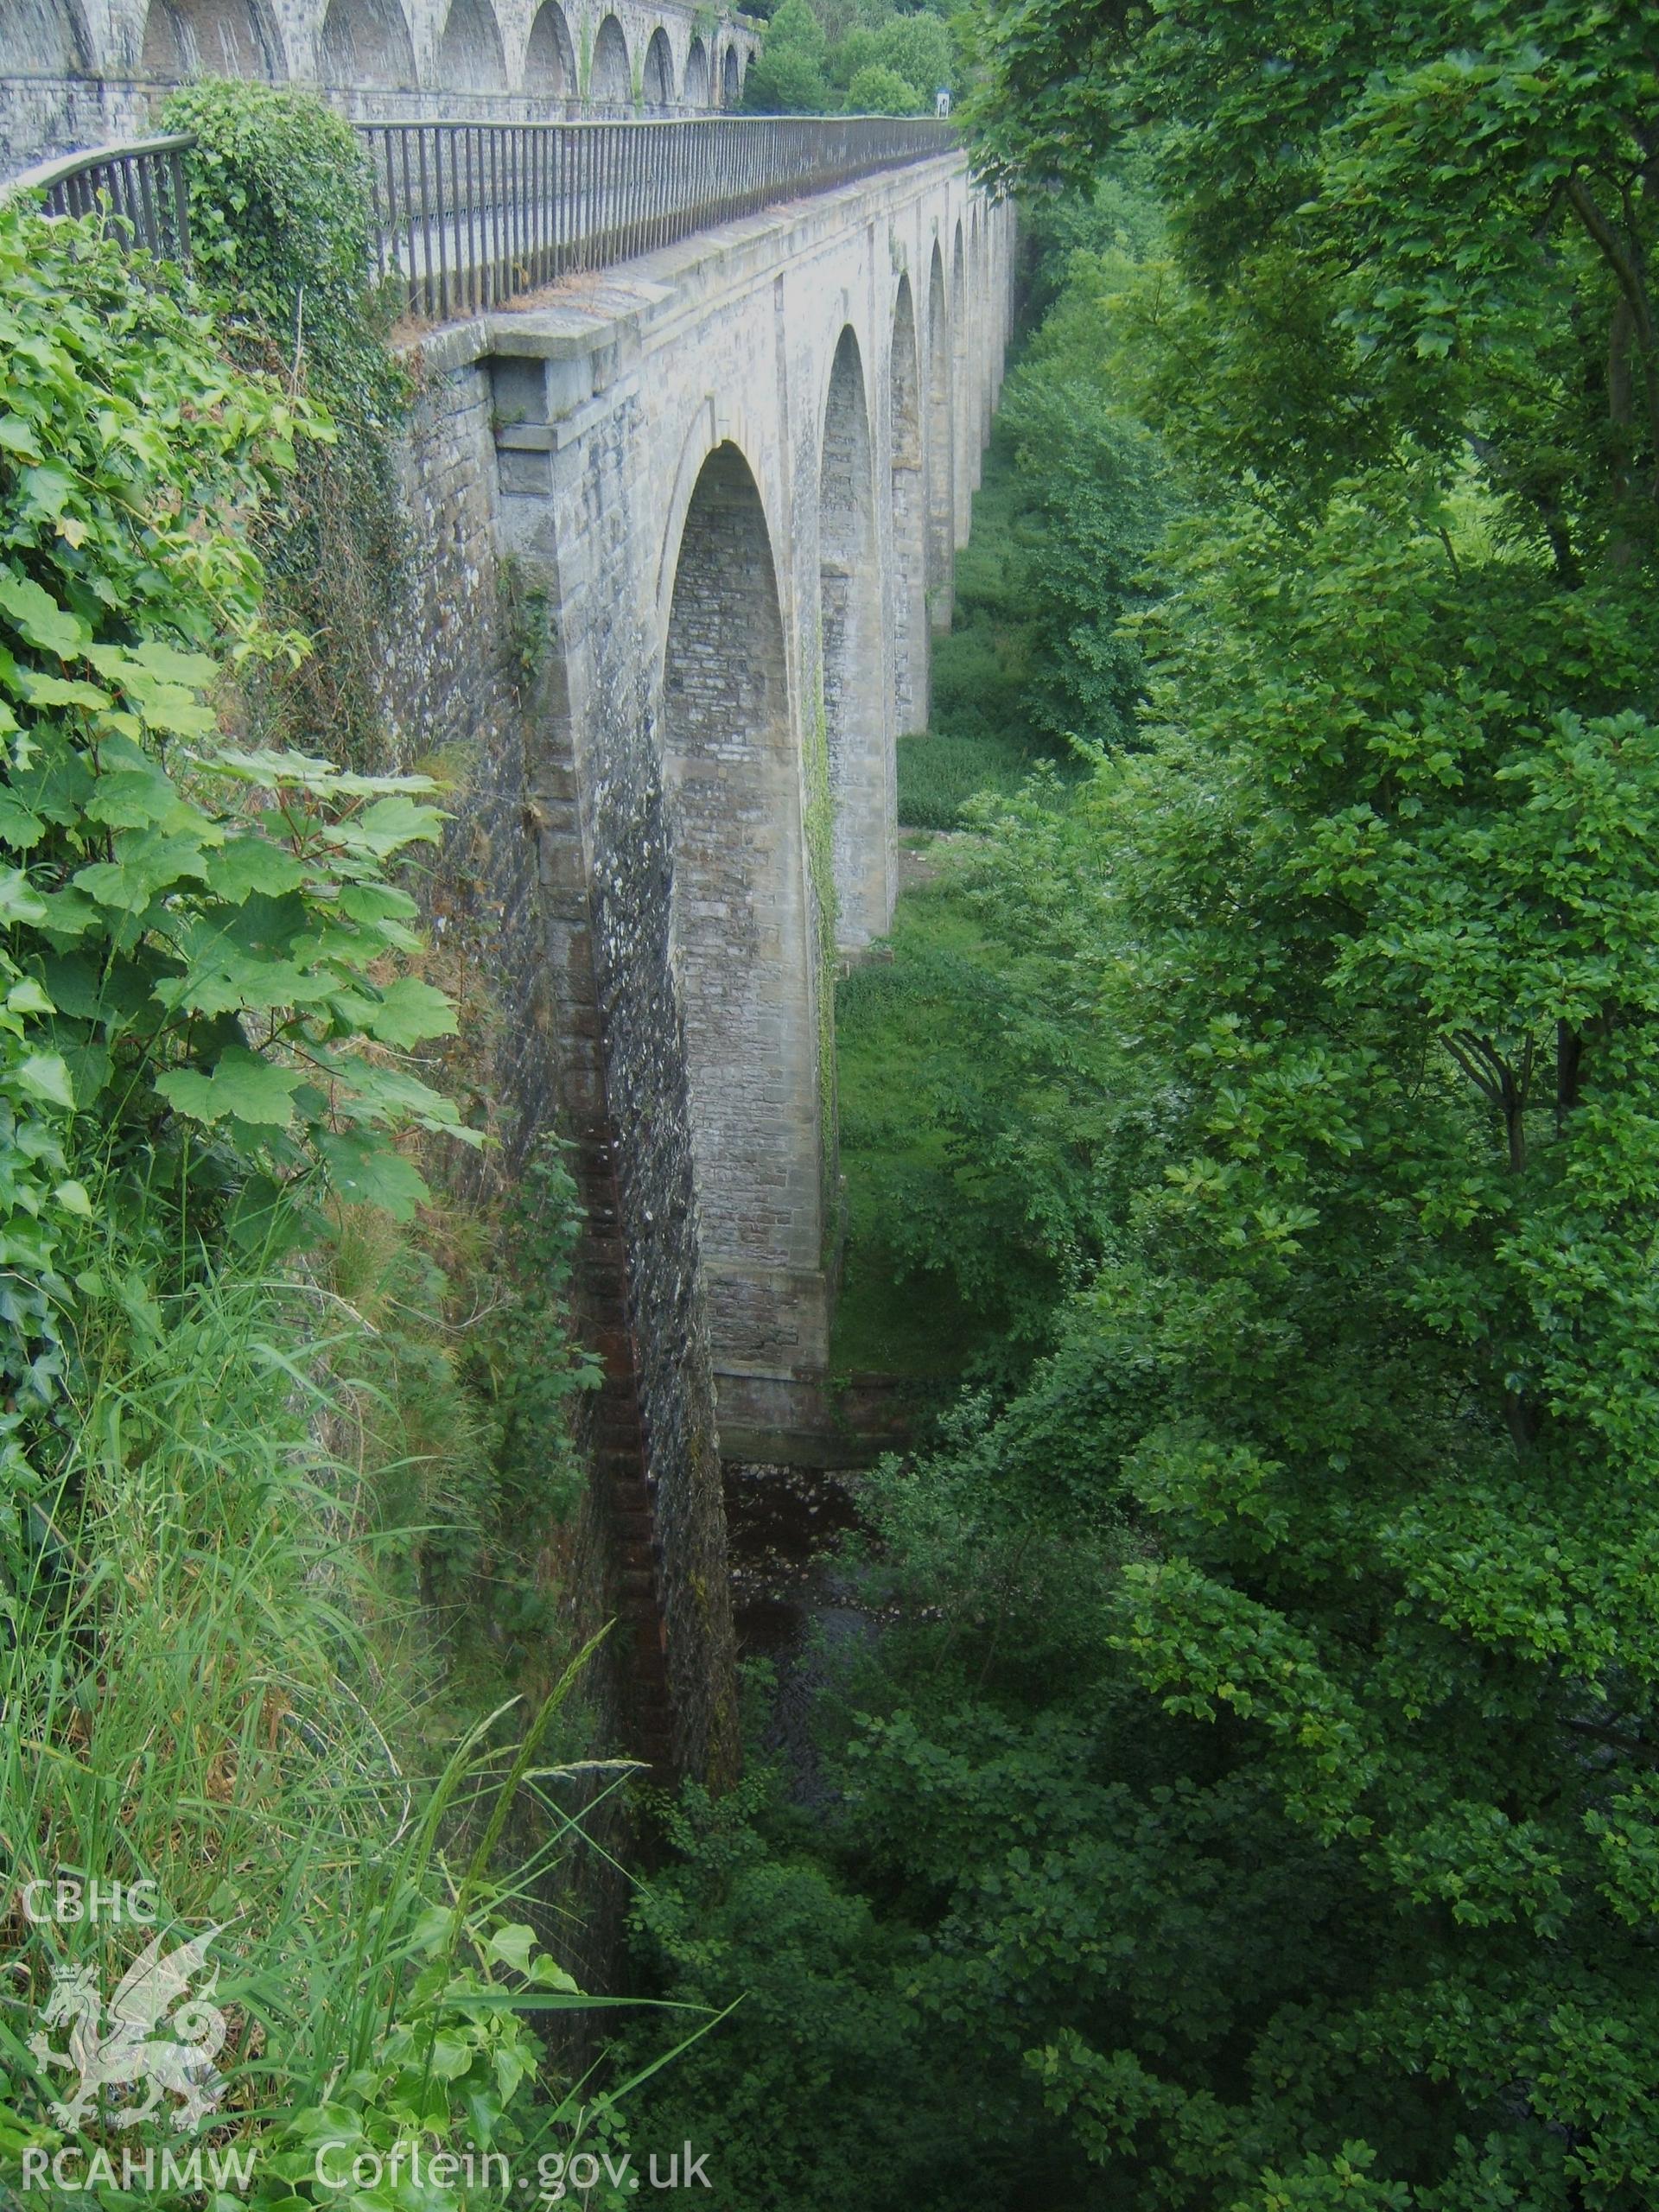 North-east elevations of Chirk Aqueduct and Viaduct from the south-east abutment.